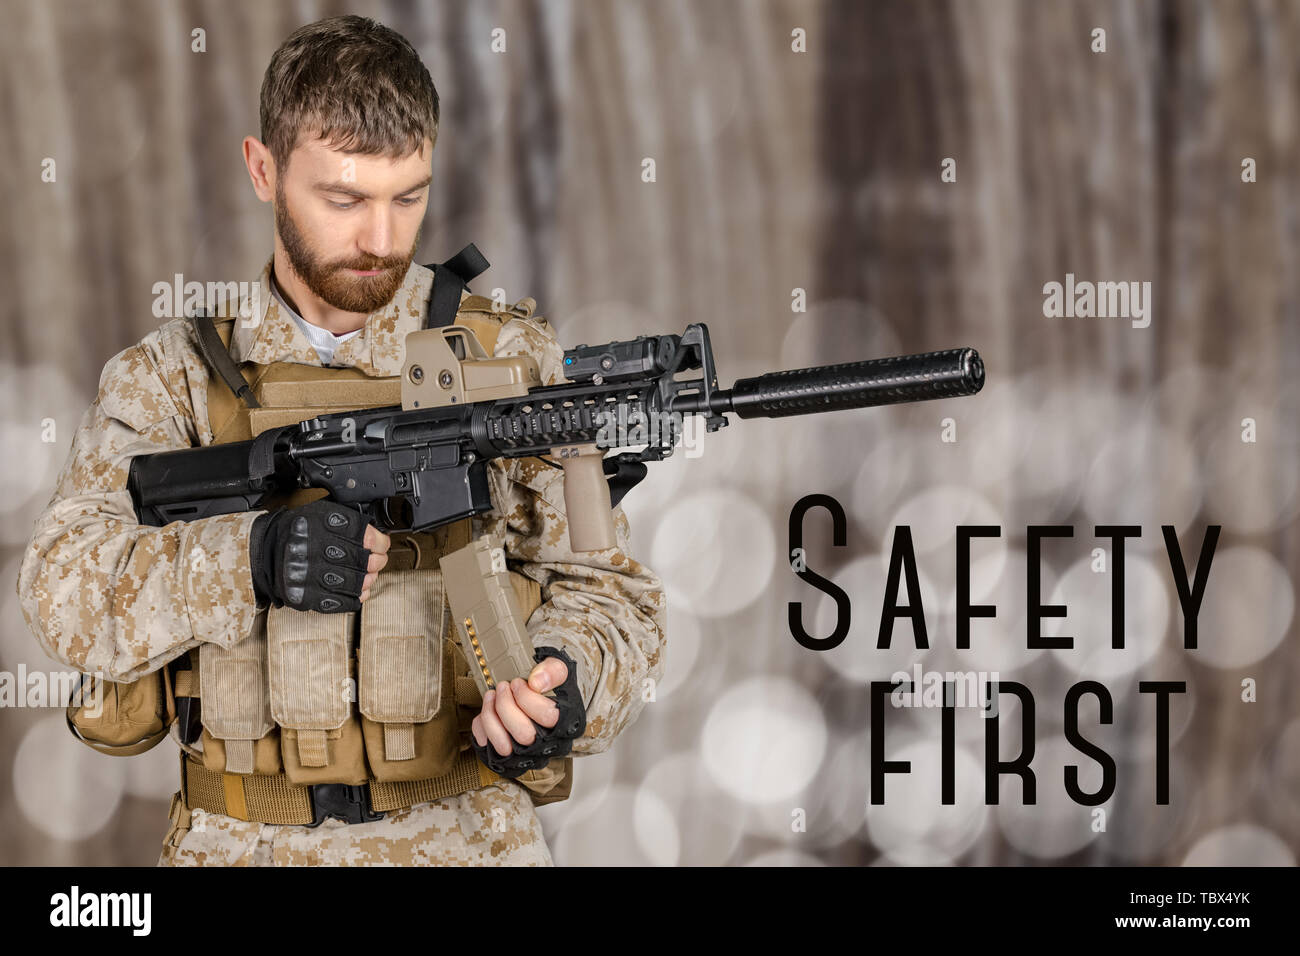 Soldier with rifle Stock Photo